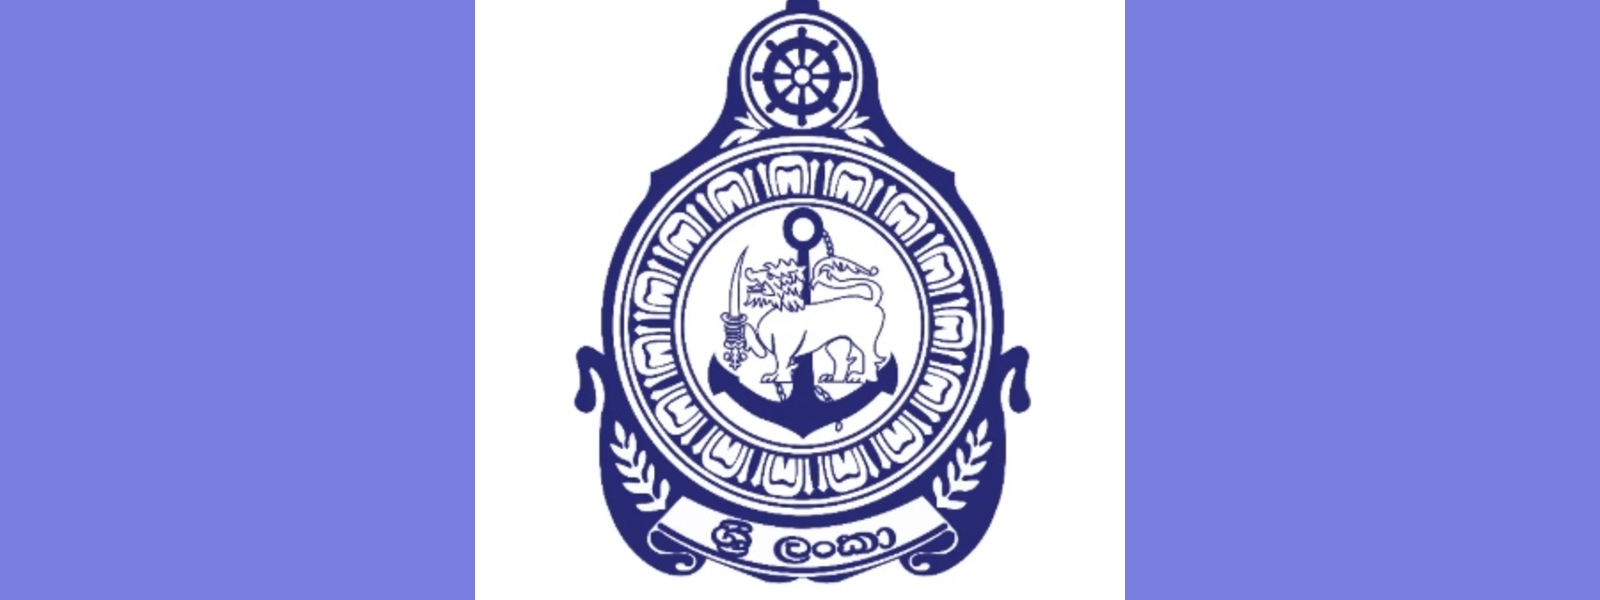 Leave of all Sri Lanka Navy personnel cancelled until further notice